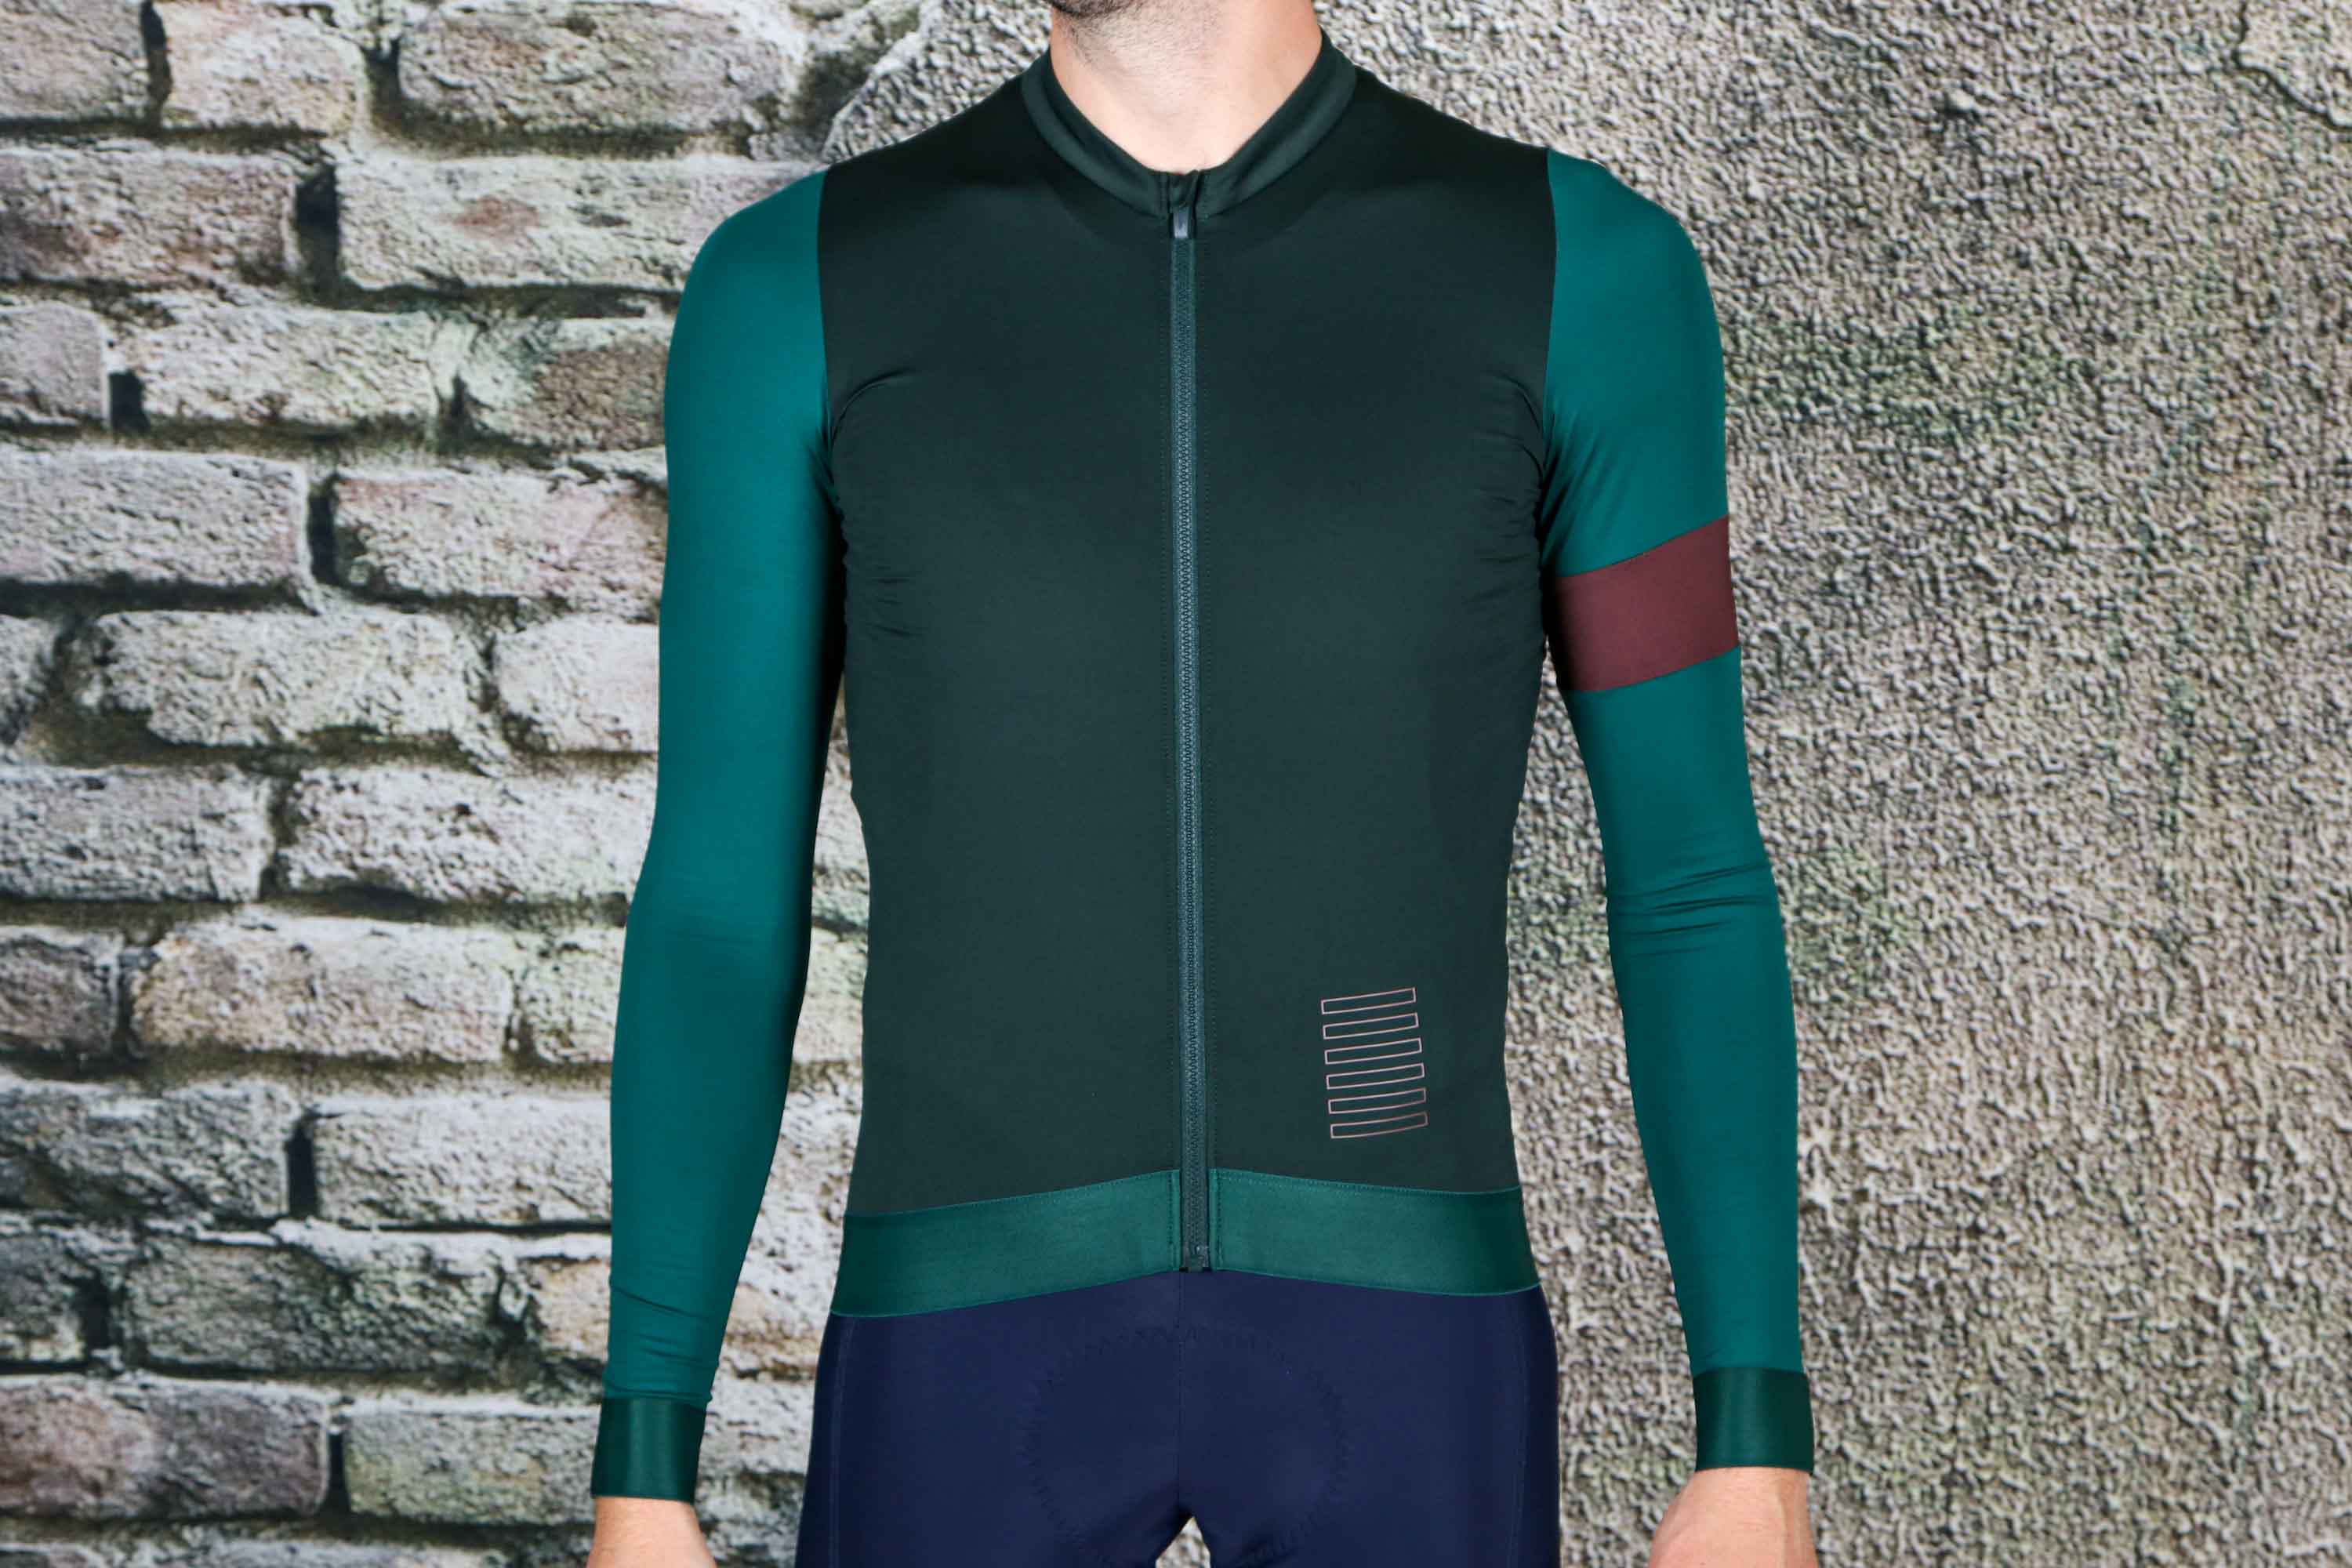 Rider Issue Rapha Pro Team Wiggins Long Sleeve Jersey Large 